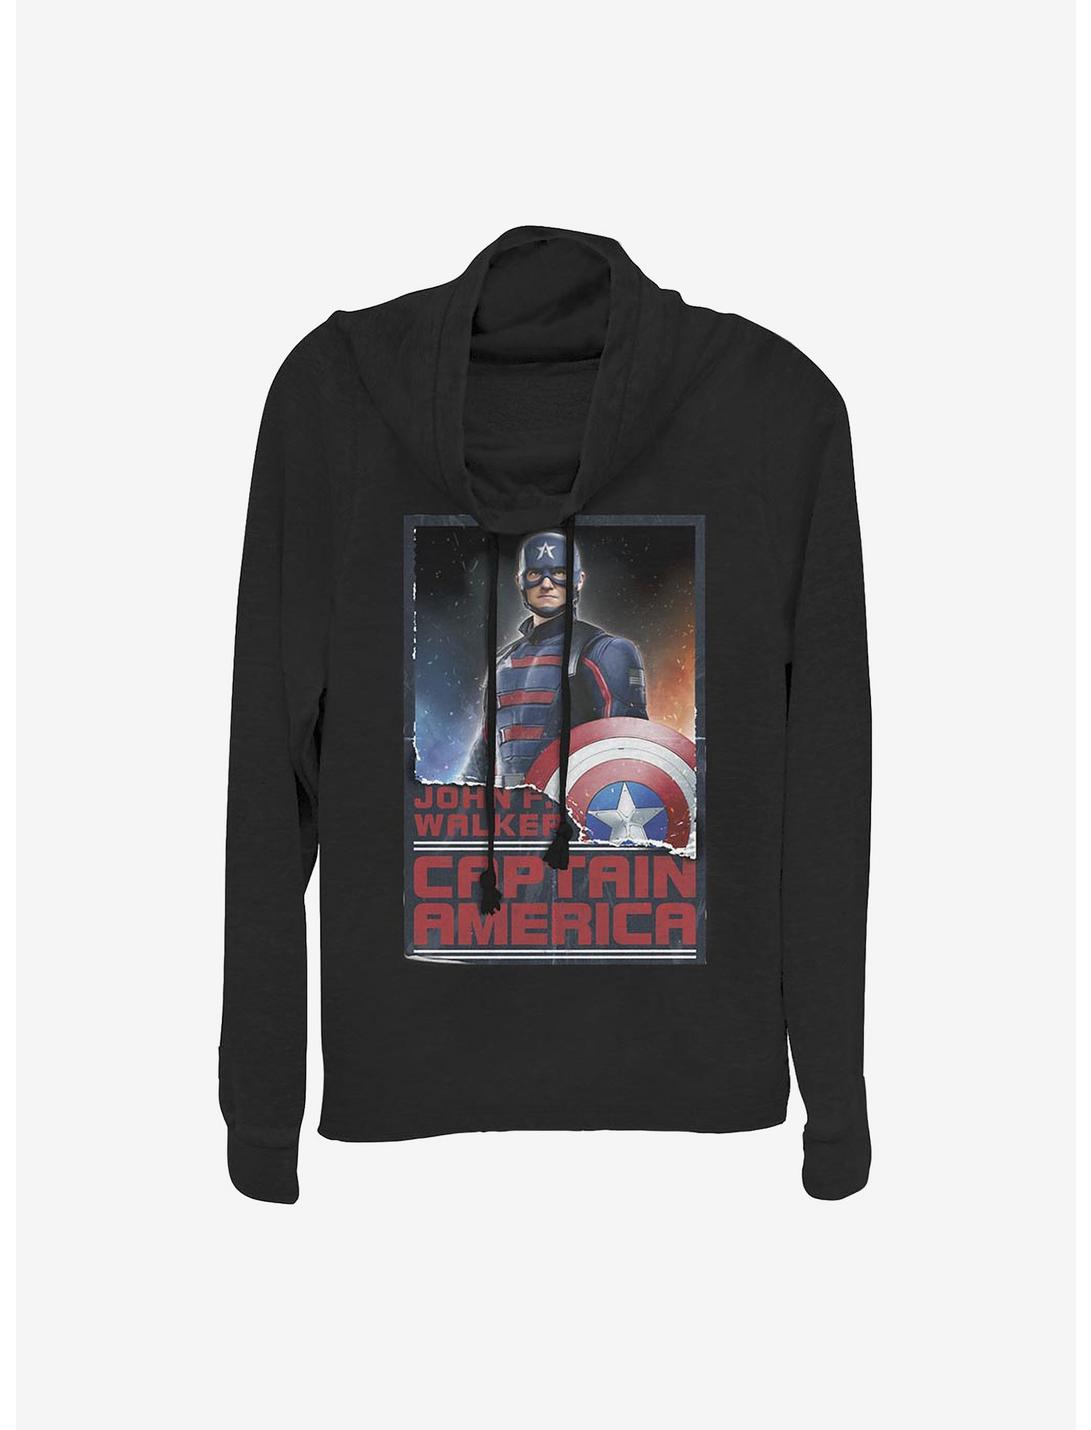 Marvel The Falcon And The Winter Soldier Walker Captain America Cowlneck Long-Sleeve Girls Top, BLACK, hi-res